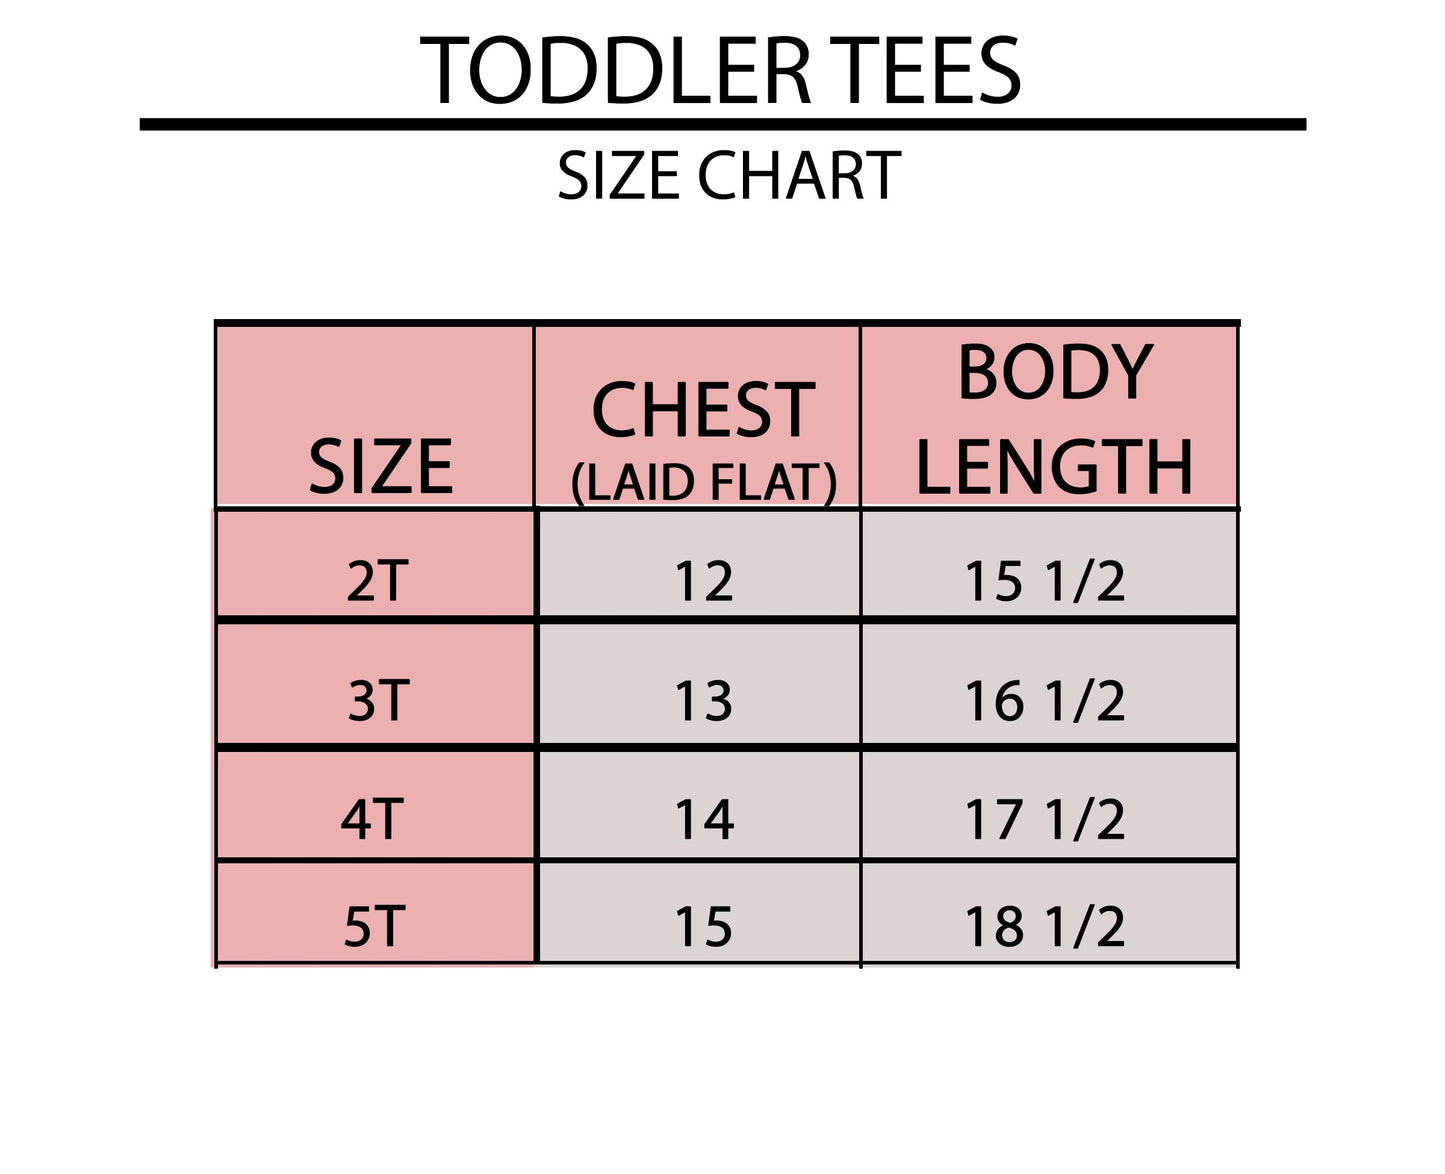 All About Christmas | Toddler Short Sleeve Crew Neck